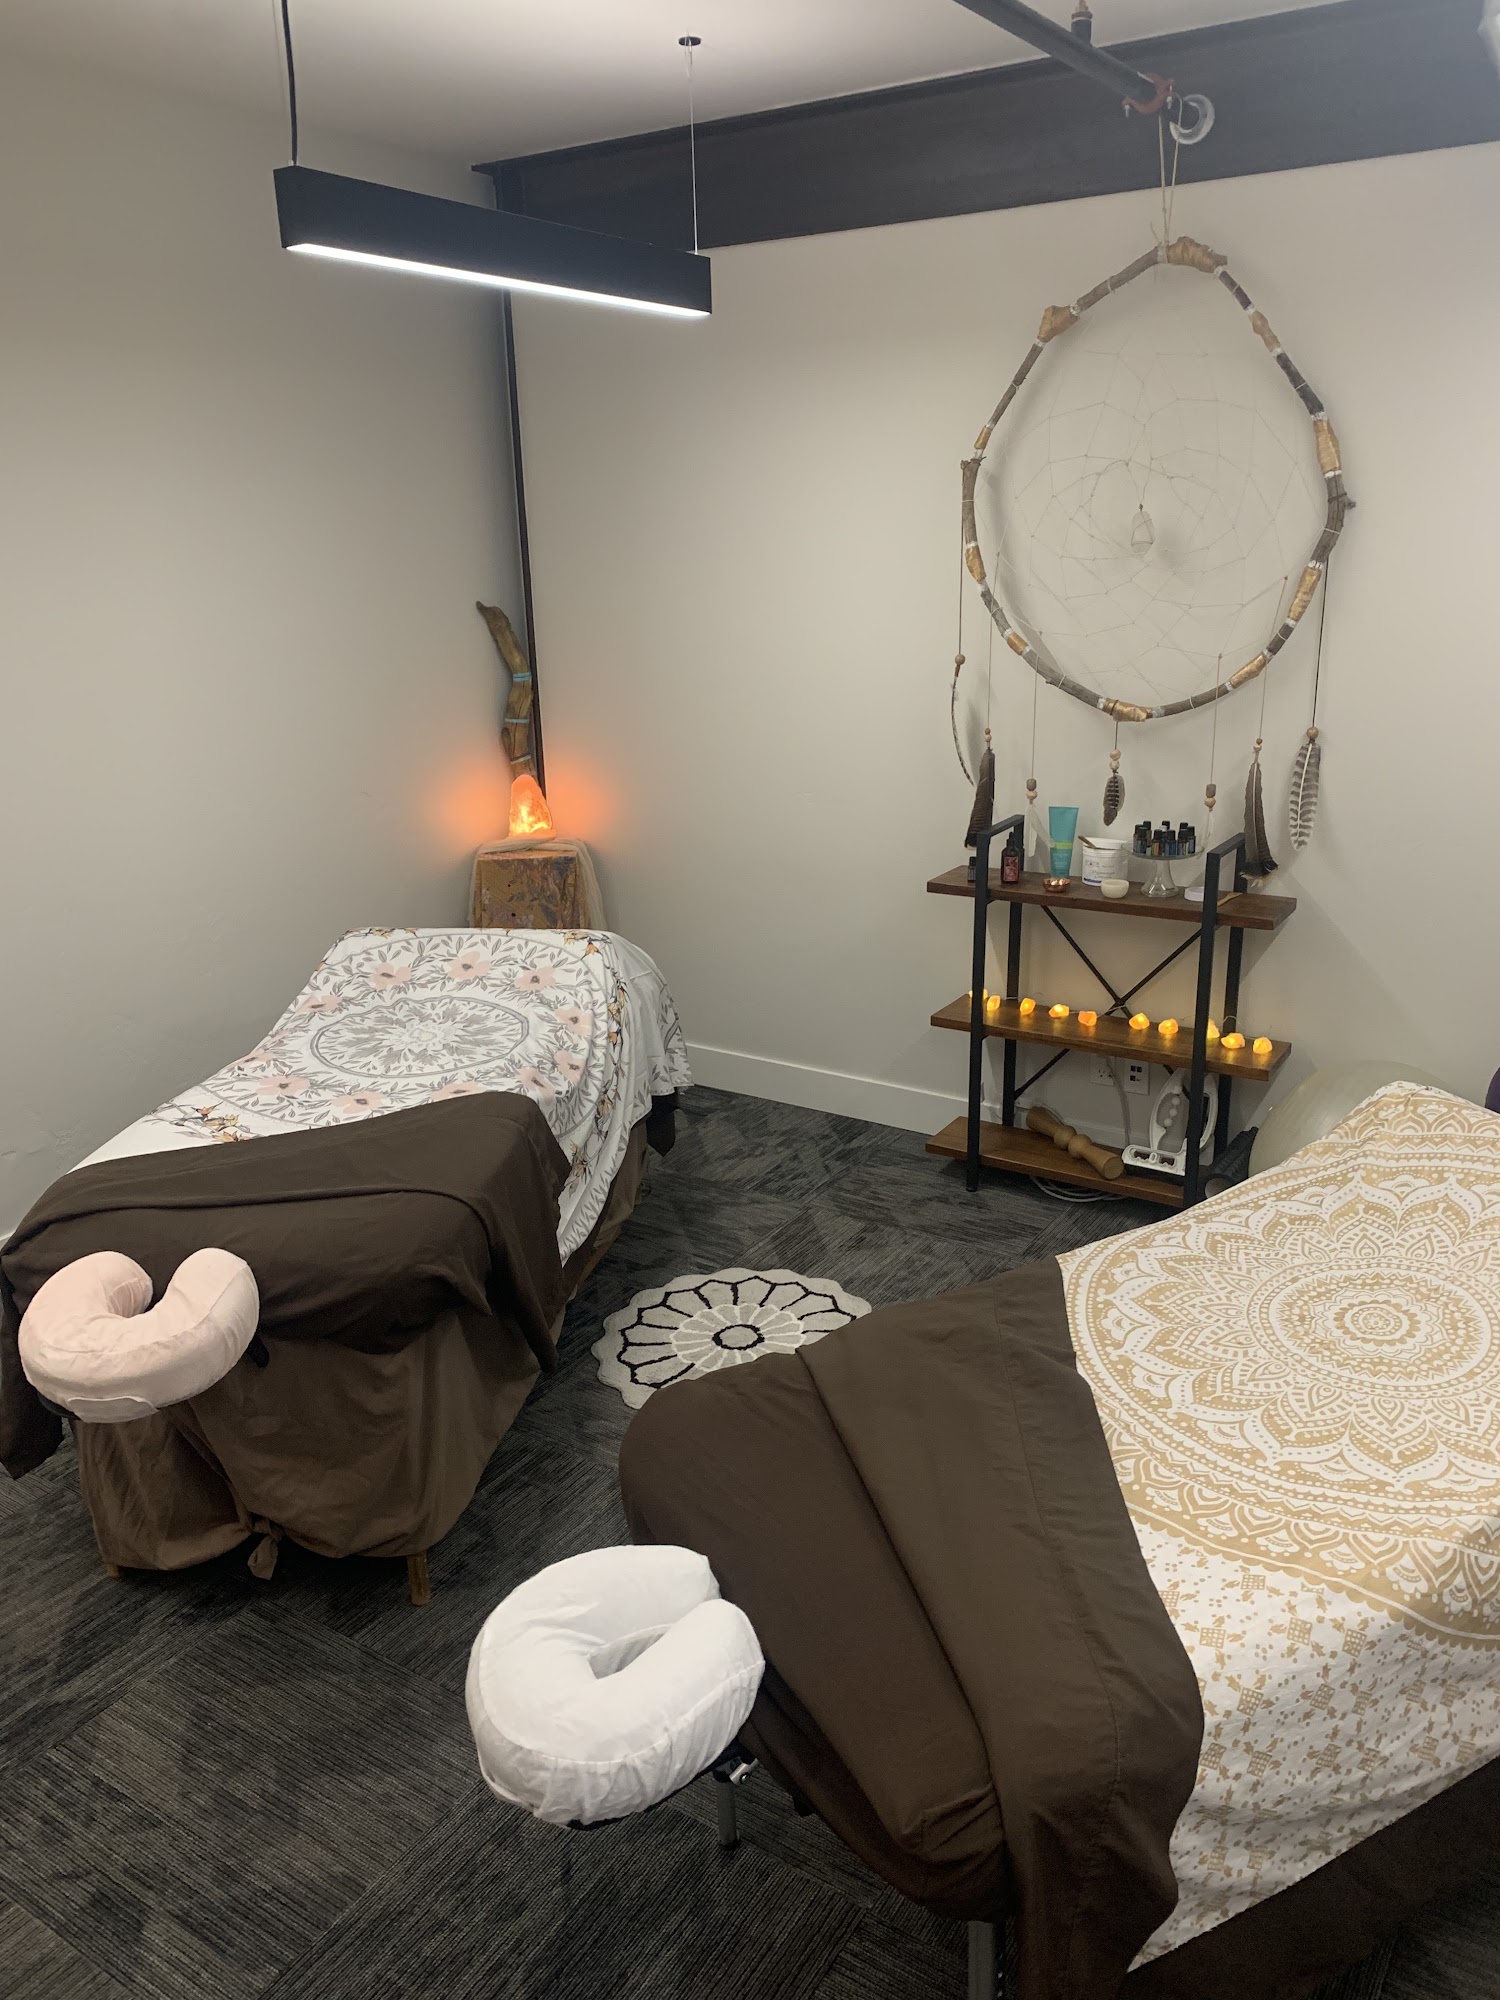 Mountain Life Massage and Bodywork 322 Belleview Ave Suite D, Crested Butte Colorado 81224